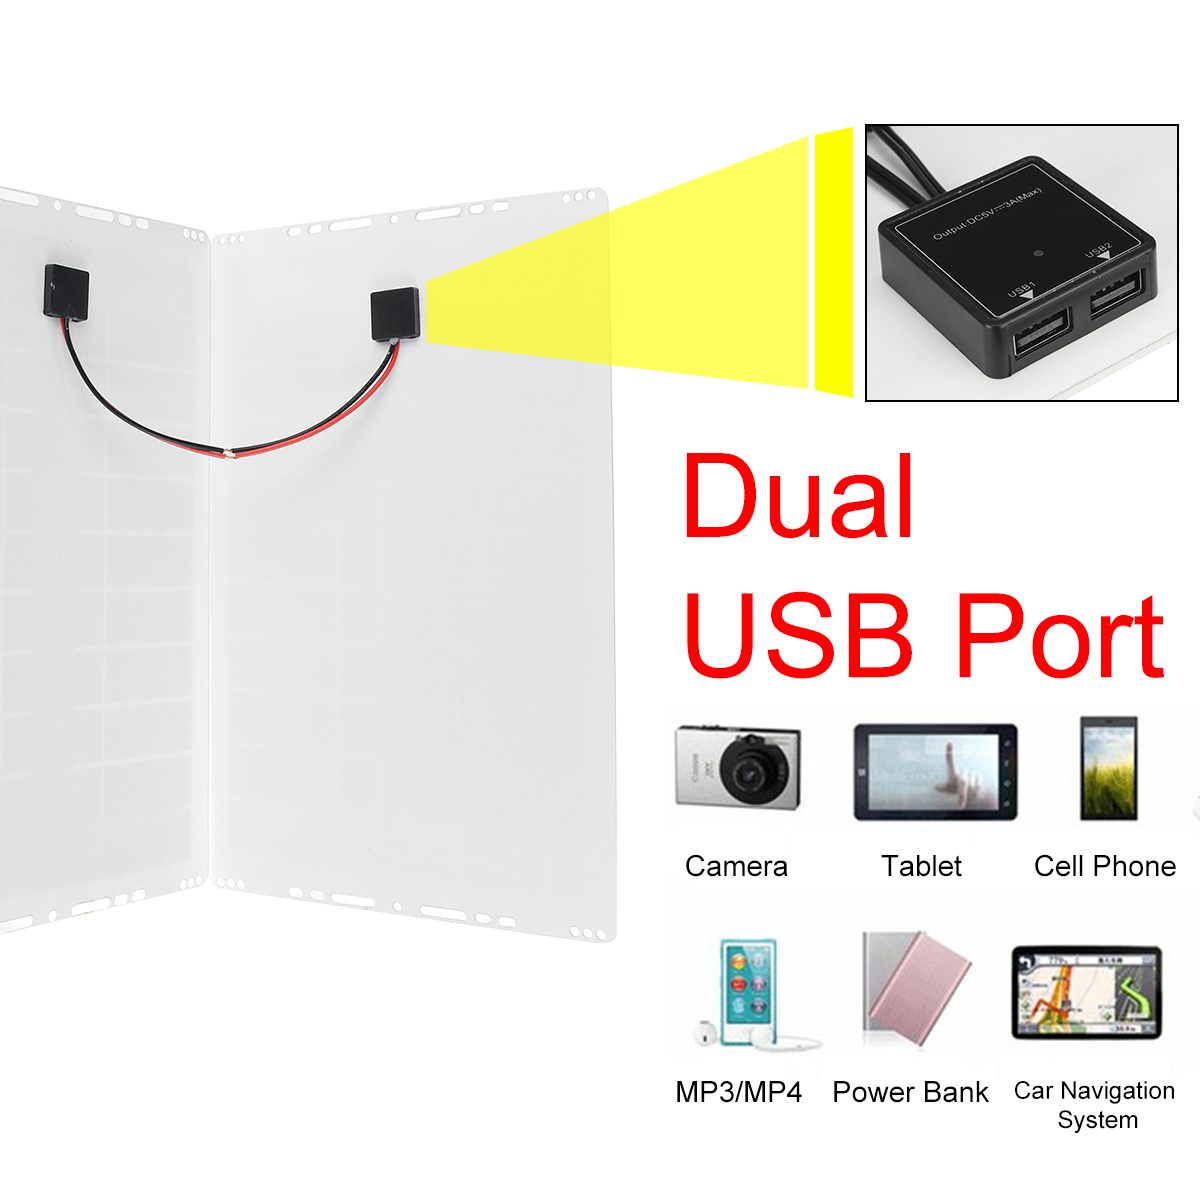 Portable-Solar-Panel-Kit-10A30A60A100A-USB-Battery-Charger-for-Outdoor-Camping-Travel-Caravan-Van-Bo-1856163-6